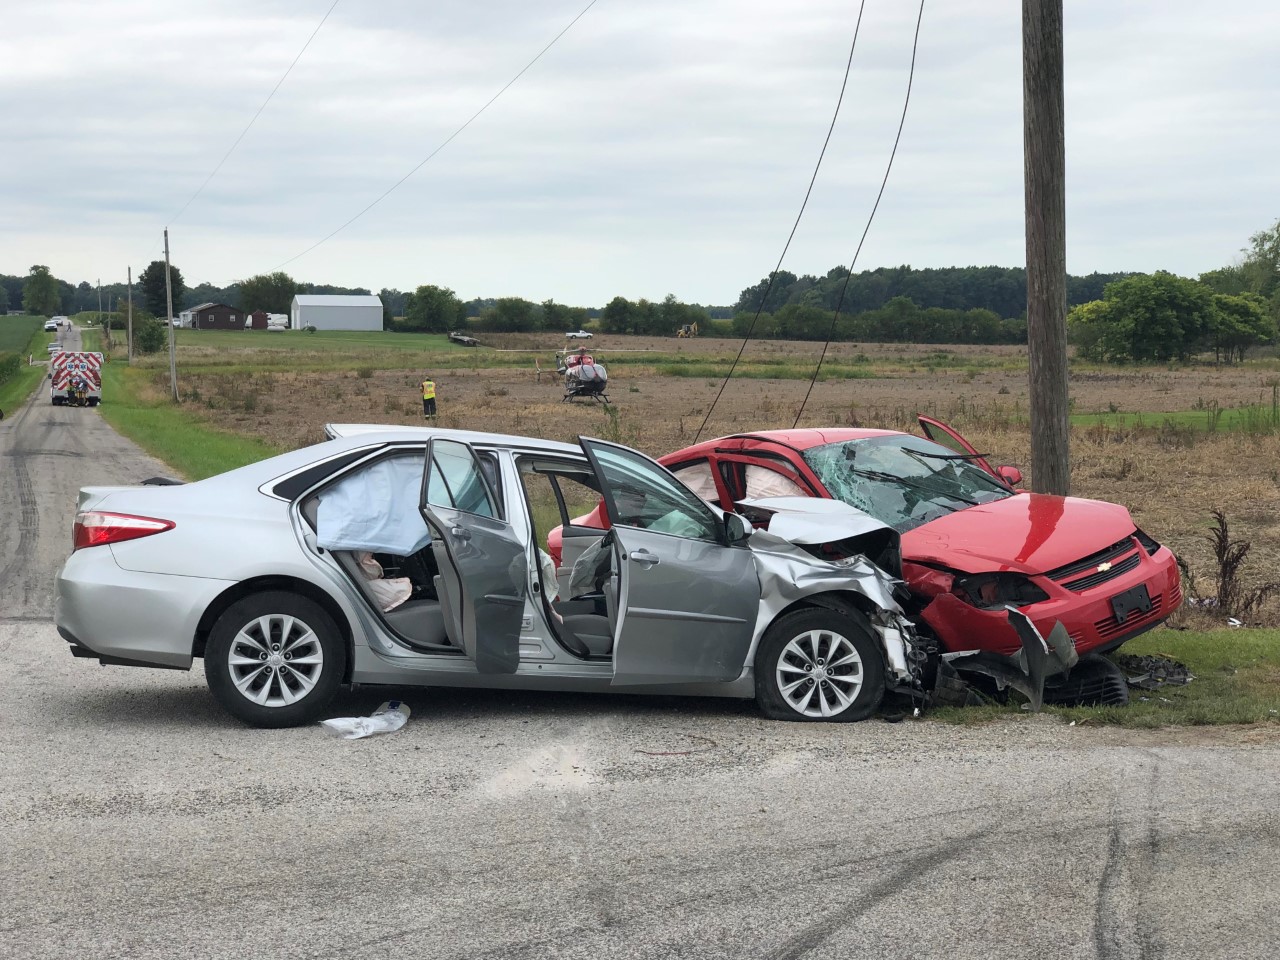 Man Shocked By Power Line After 2 Car Crash Injuring 3 Others Indianapolis News Indiana